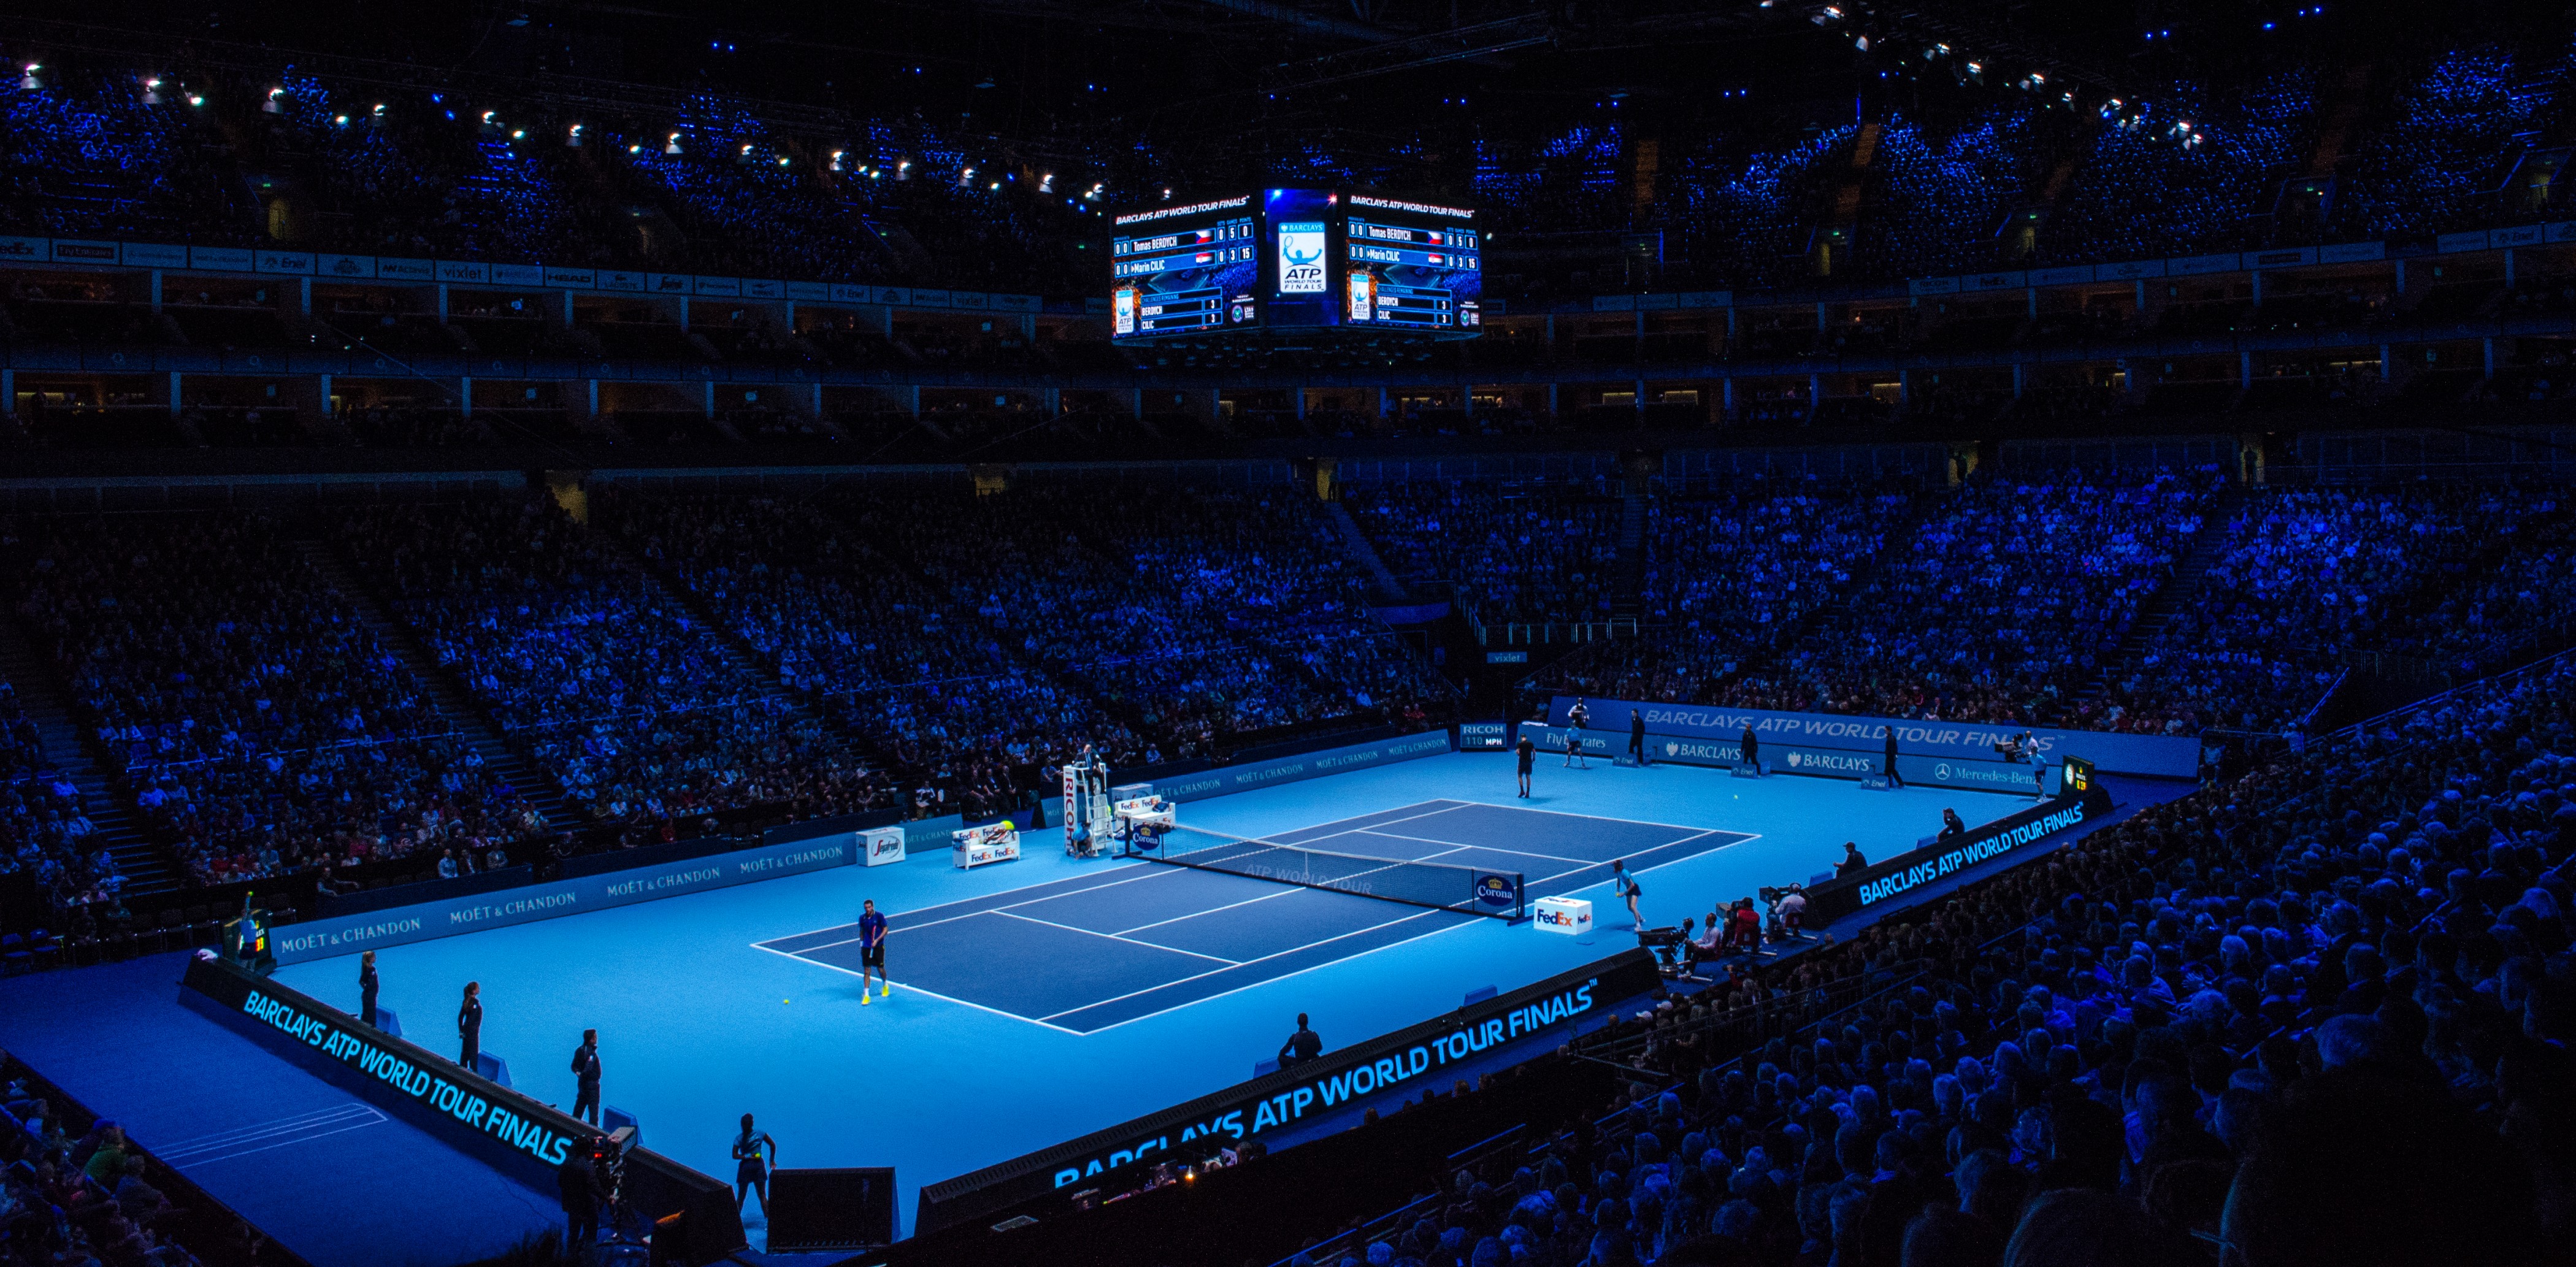 2014-11-12-2014-atp-world-tour-finals-show-court-during-marin-cilic-vs-thomas-berdych-match-1-by-michael-frey-4938918510.jpg